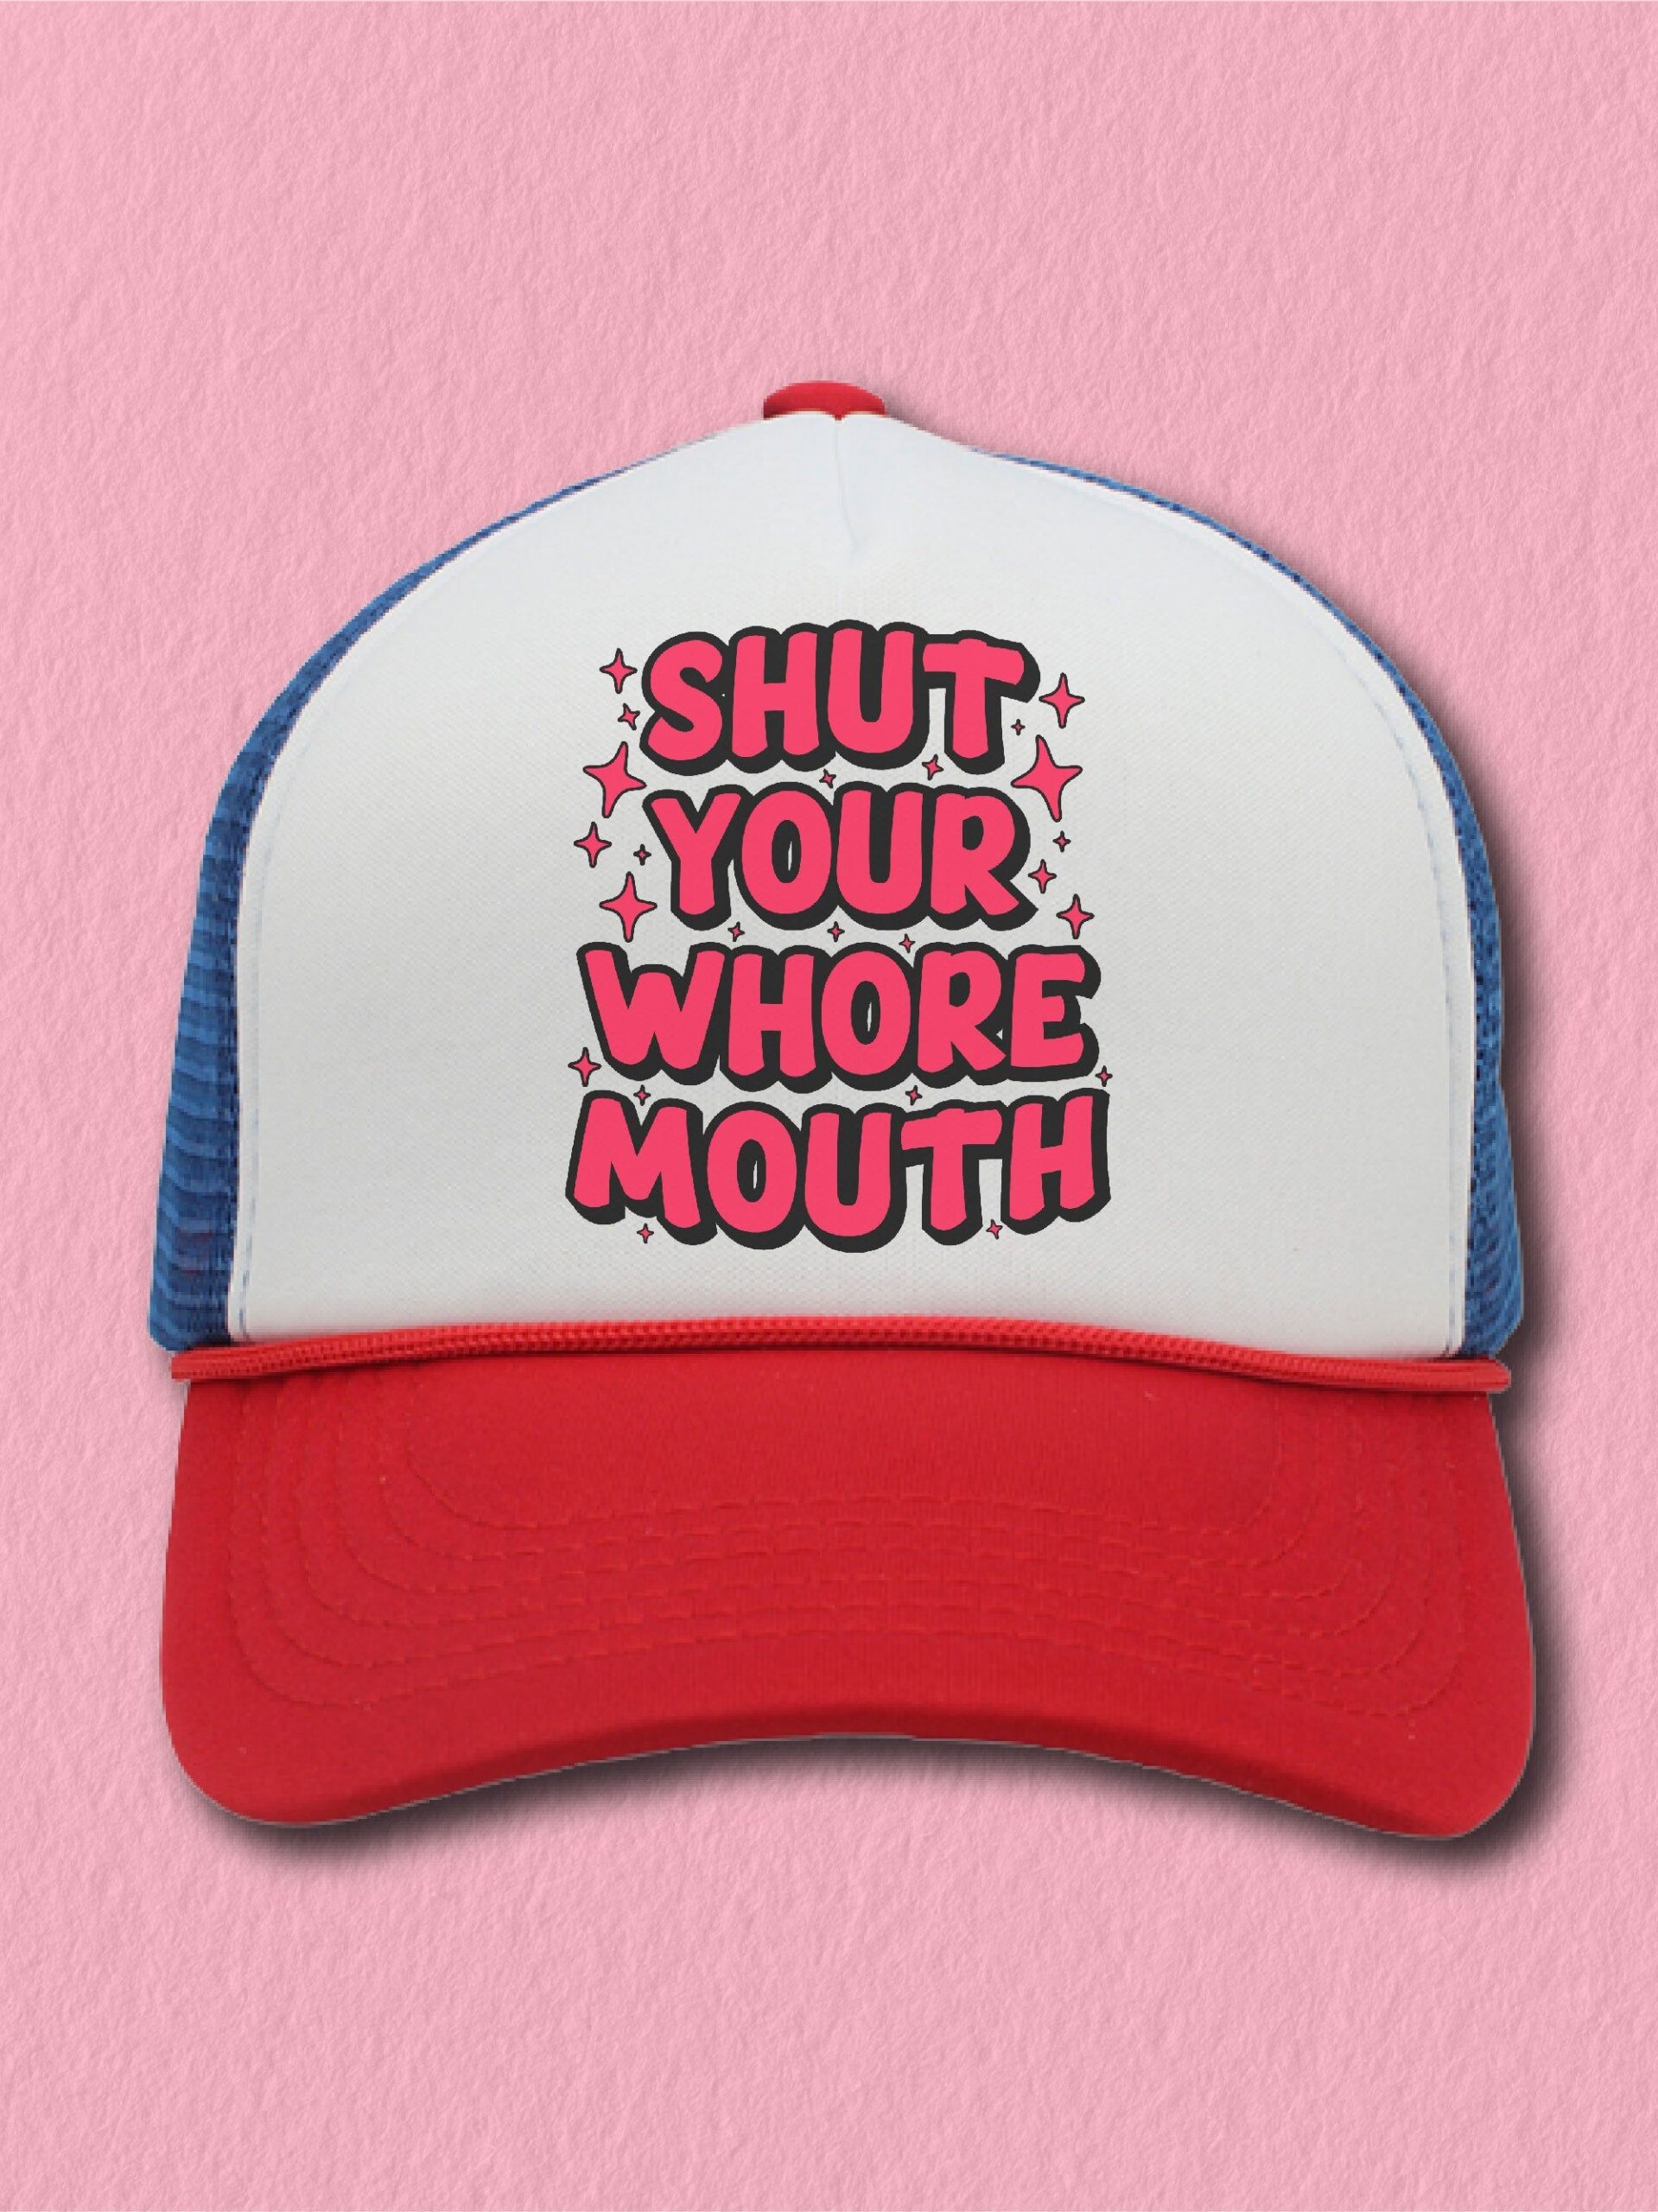 Funny Hats For The Real Fum And Amusement